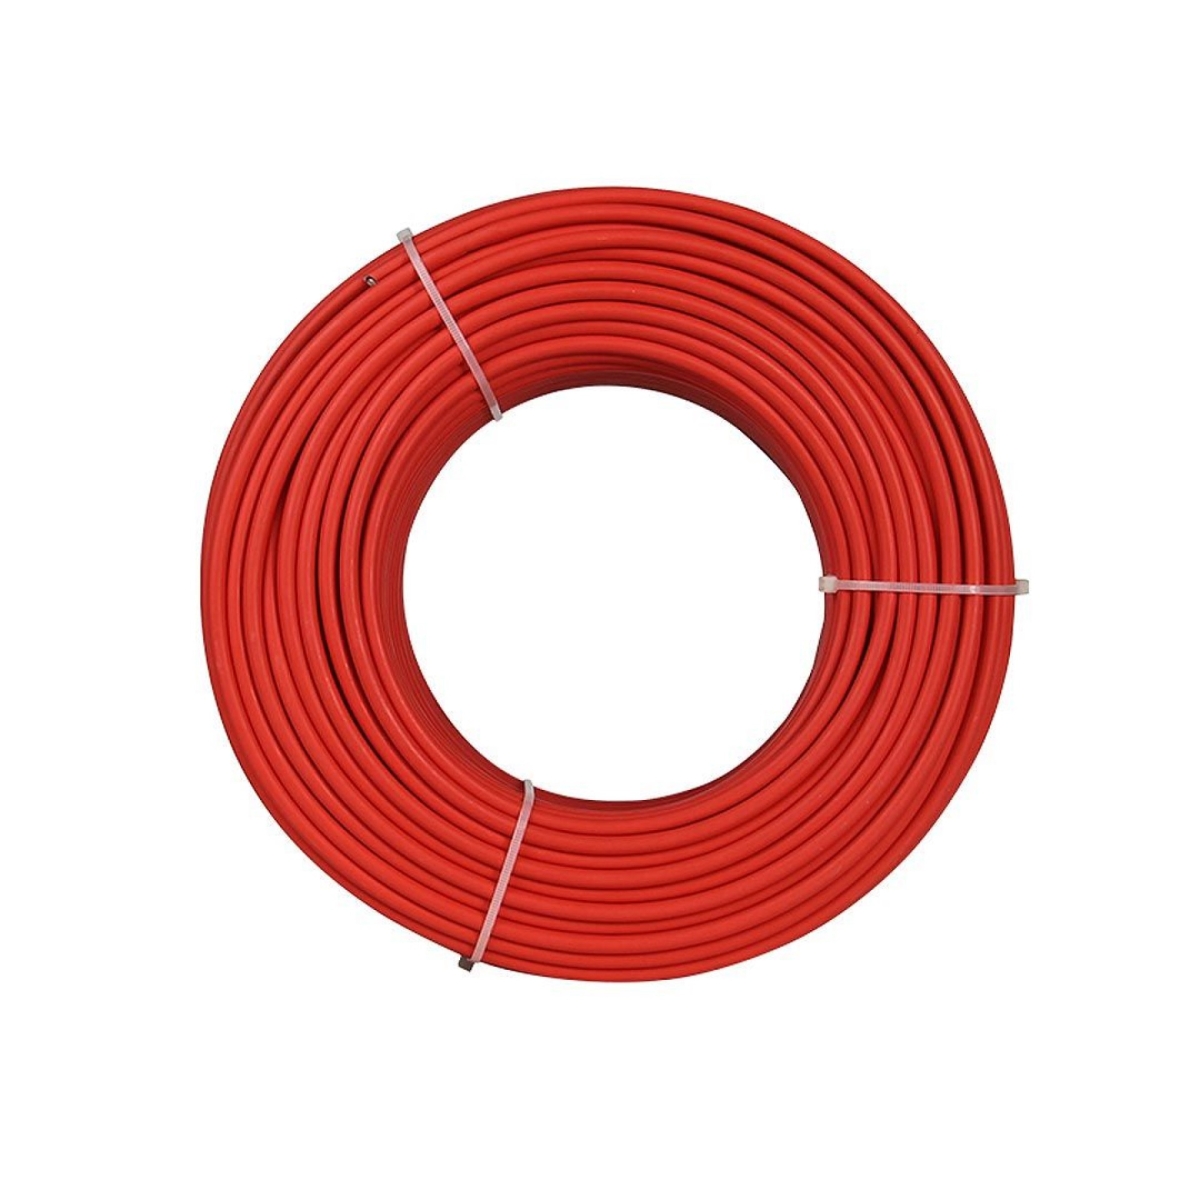 TommaTech 2.5 mm Solar Cable Red